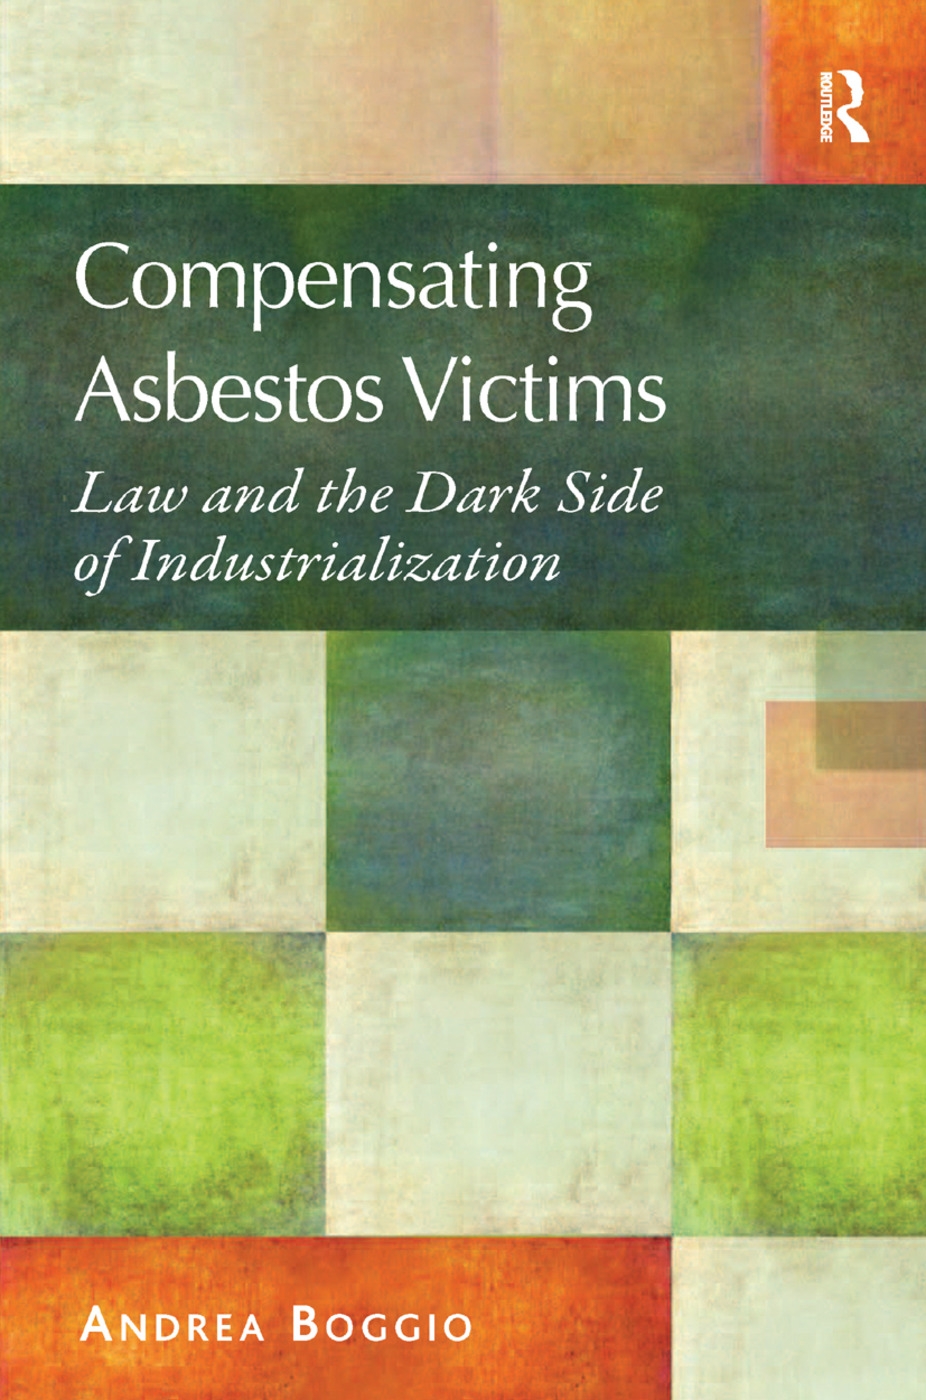 Compensating Asbestos Victims: Law and the Dark Side of Industrialization. by Andrea Boggio